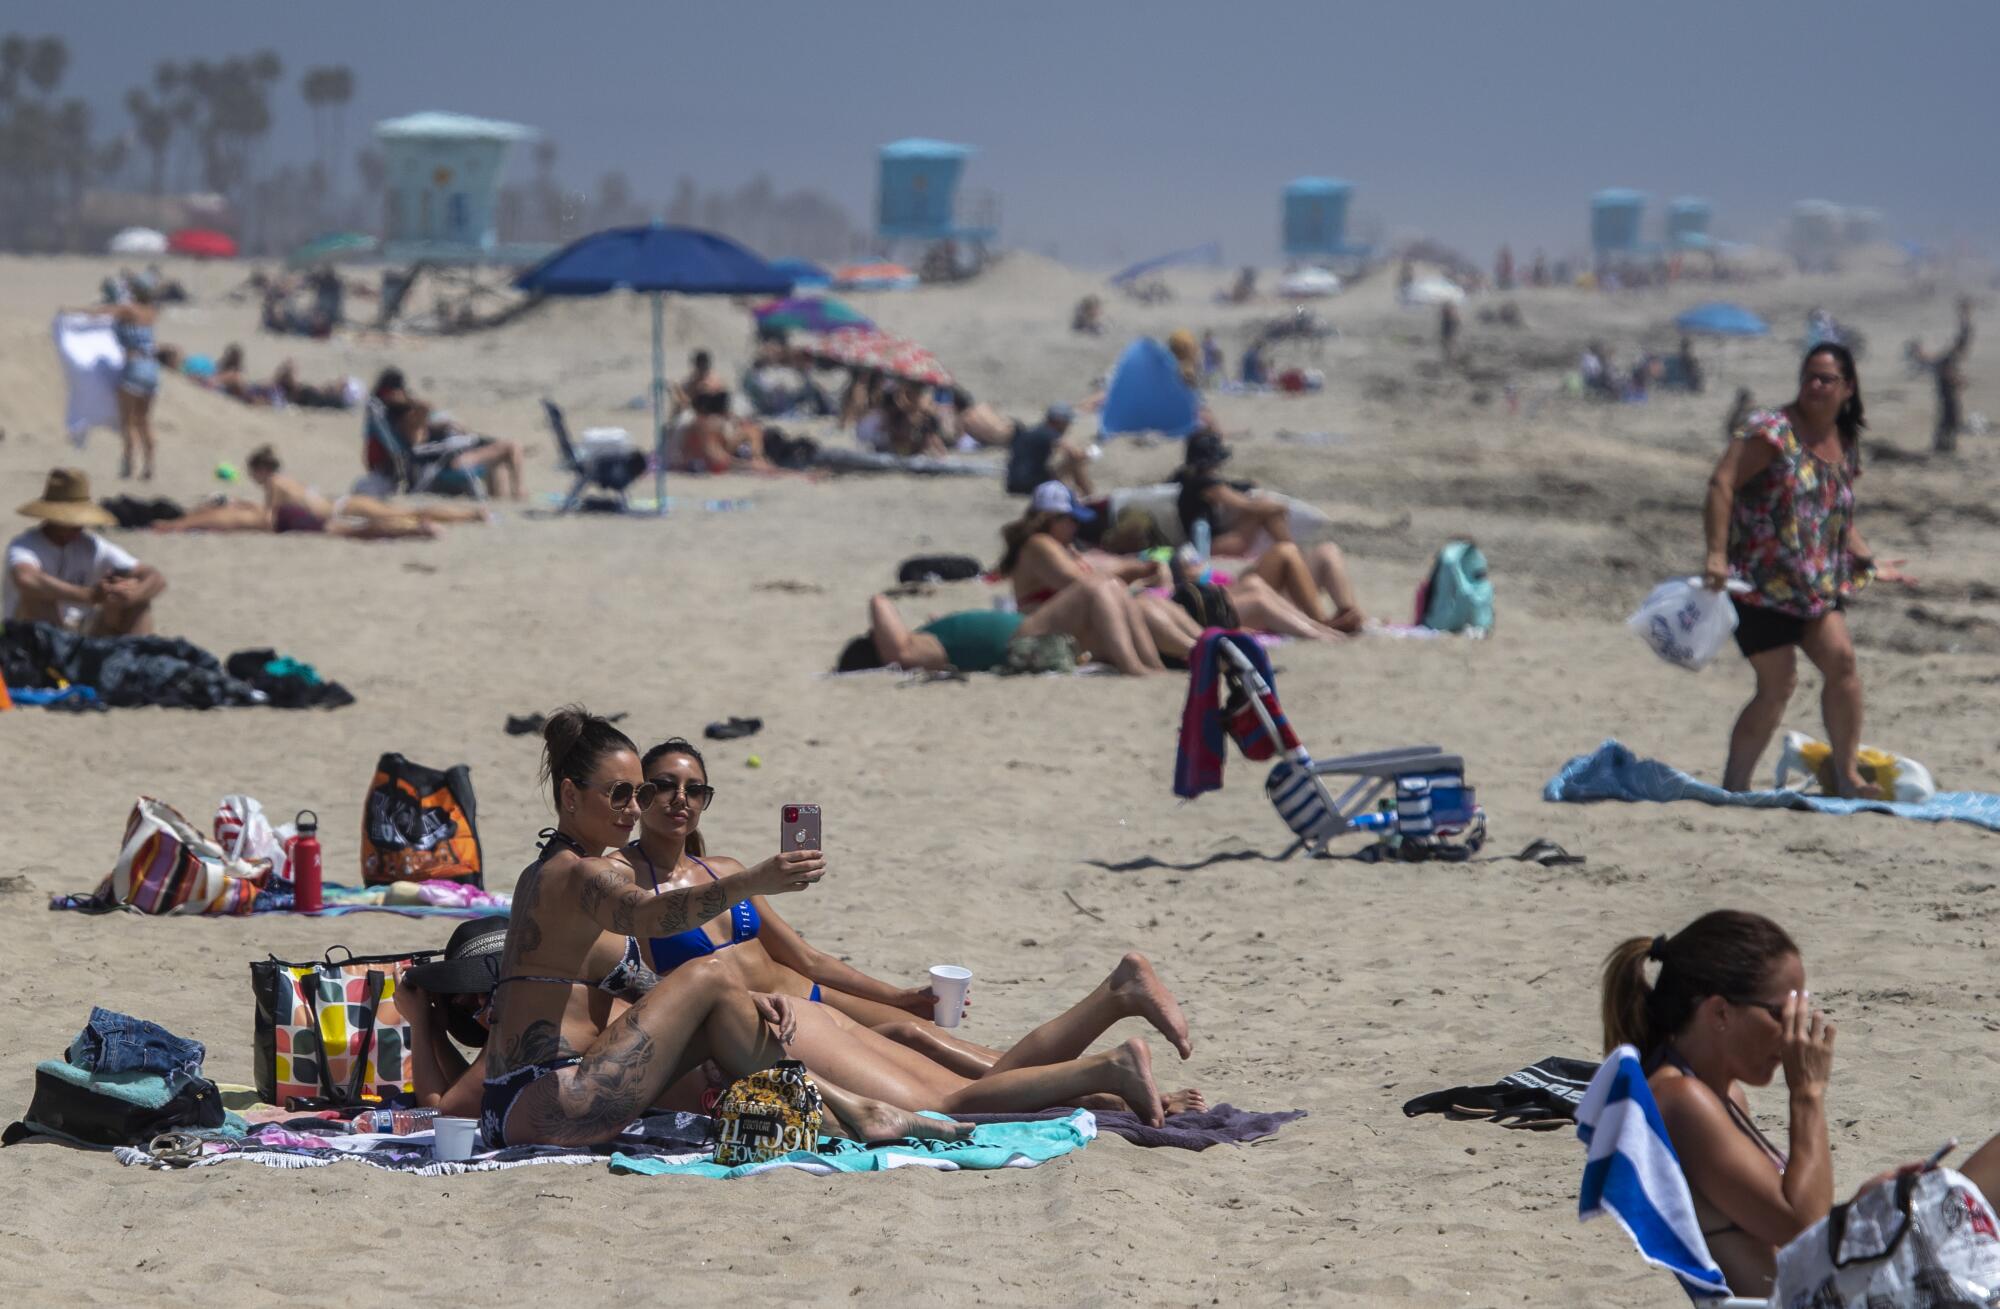 Cailin Healy and an unidentified friend, both of Calabasas, take a selfie together as beachgoers enjoy warm summer-like weather in Huntington Beach amid state and city social distancing regulations mandated by Gov. Newsom.